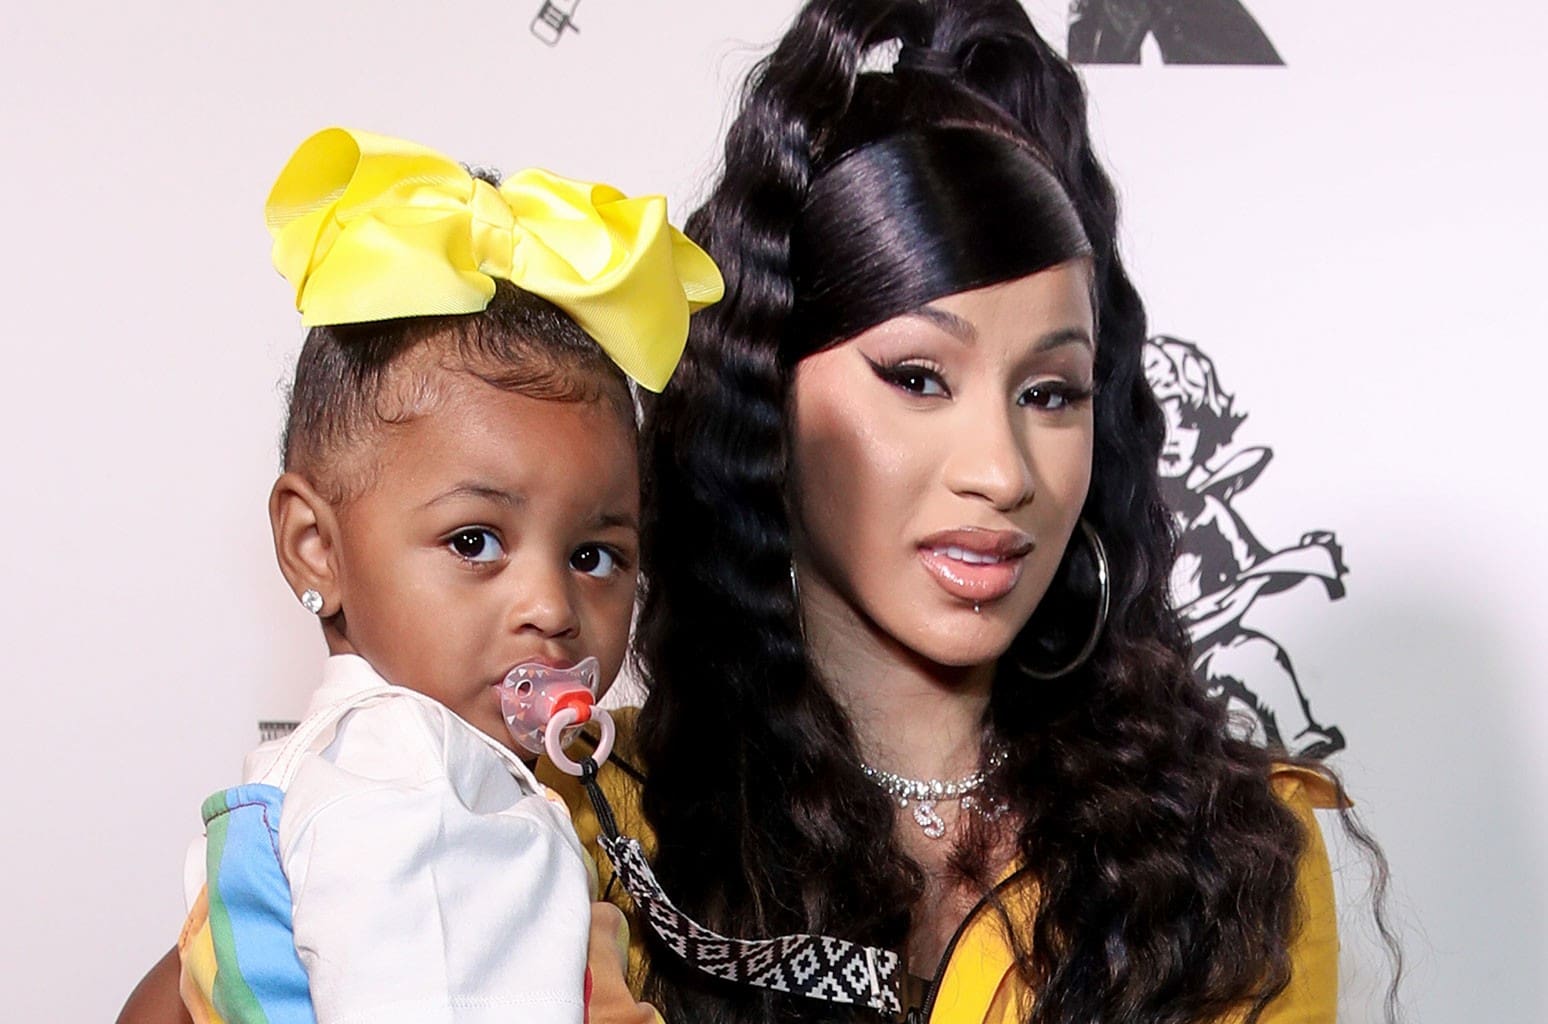 cardi-b-lands-in-massive-scandal-following-hateful-comments-directed-at-her-daughter